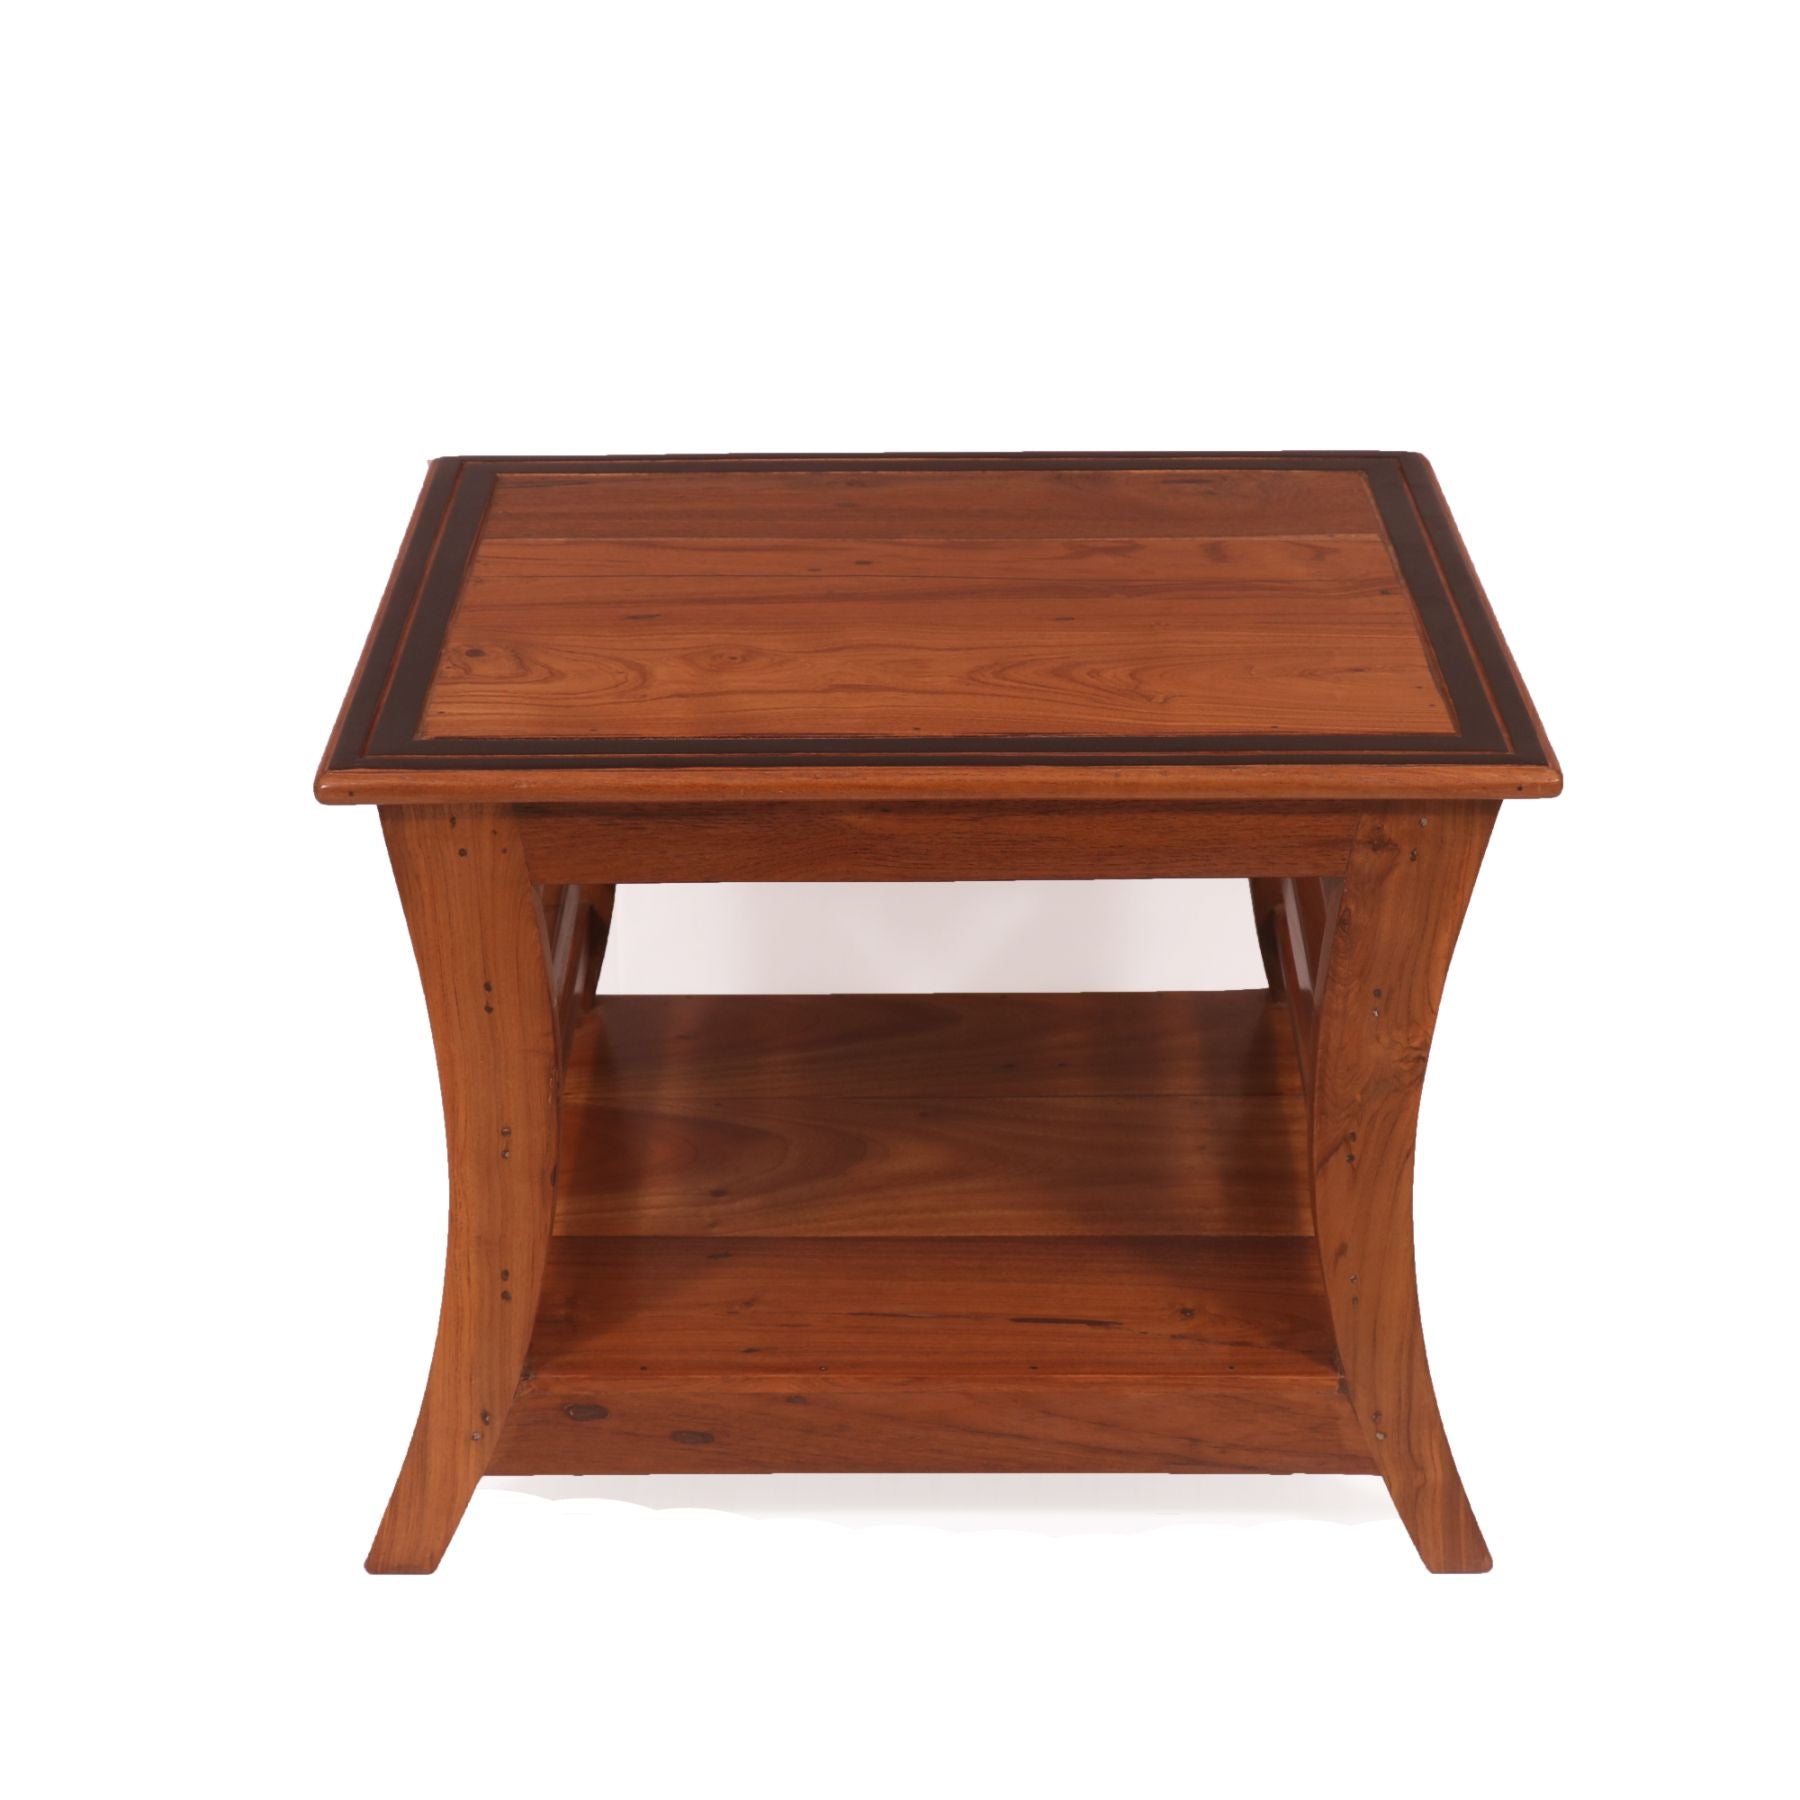 Classy Natural Solid Wood Coffee Table - border black round Coffee Table